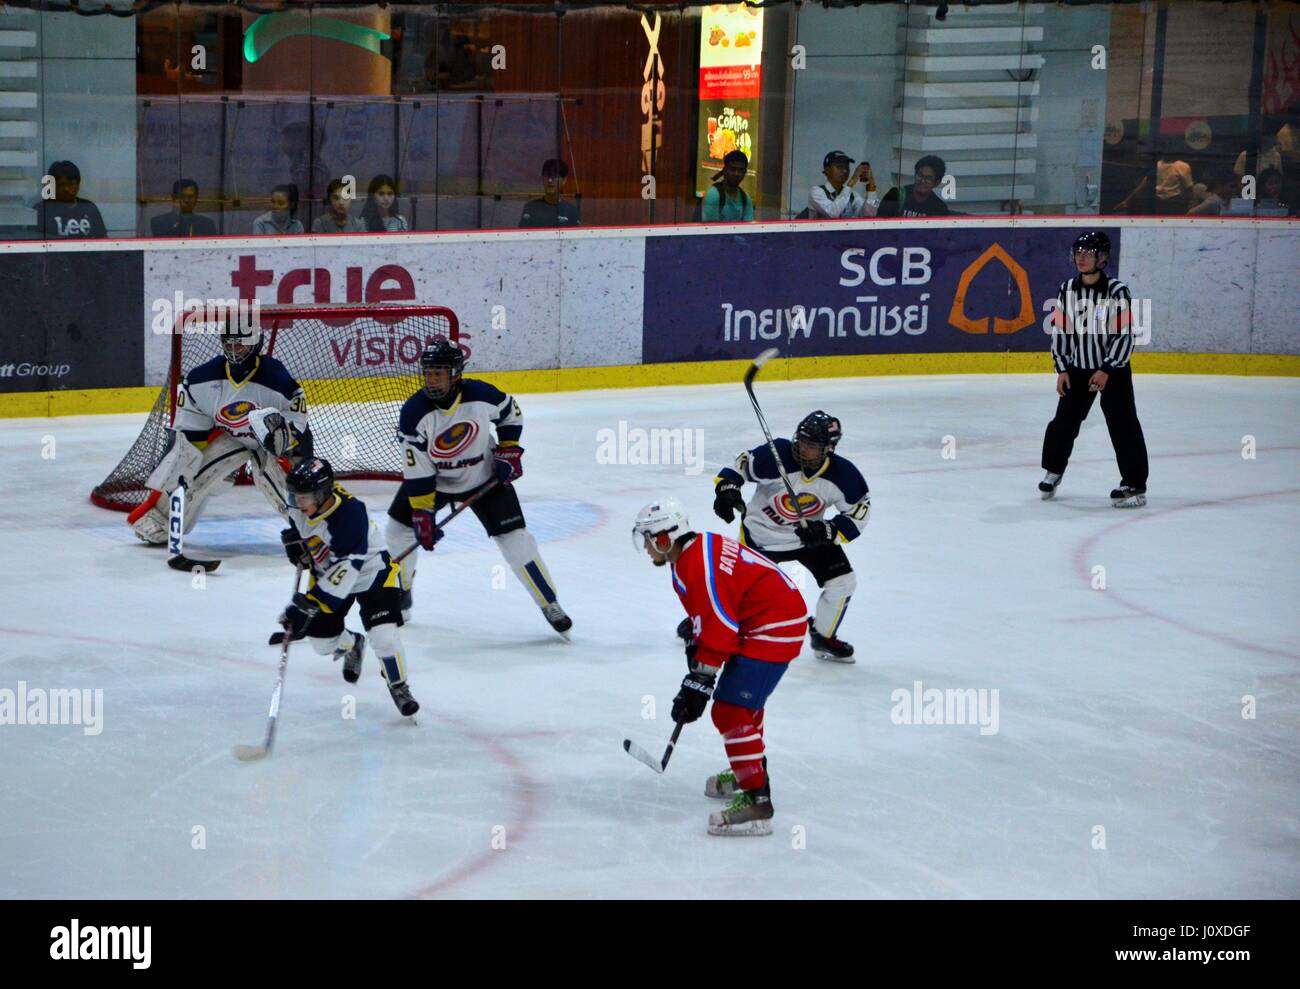 Malaysia team players defend goal vs Mongolia in Ice Hockey match in rink while referee watches Bangkok Thailand Stock Photo